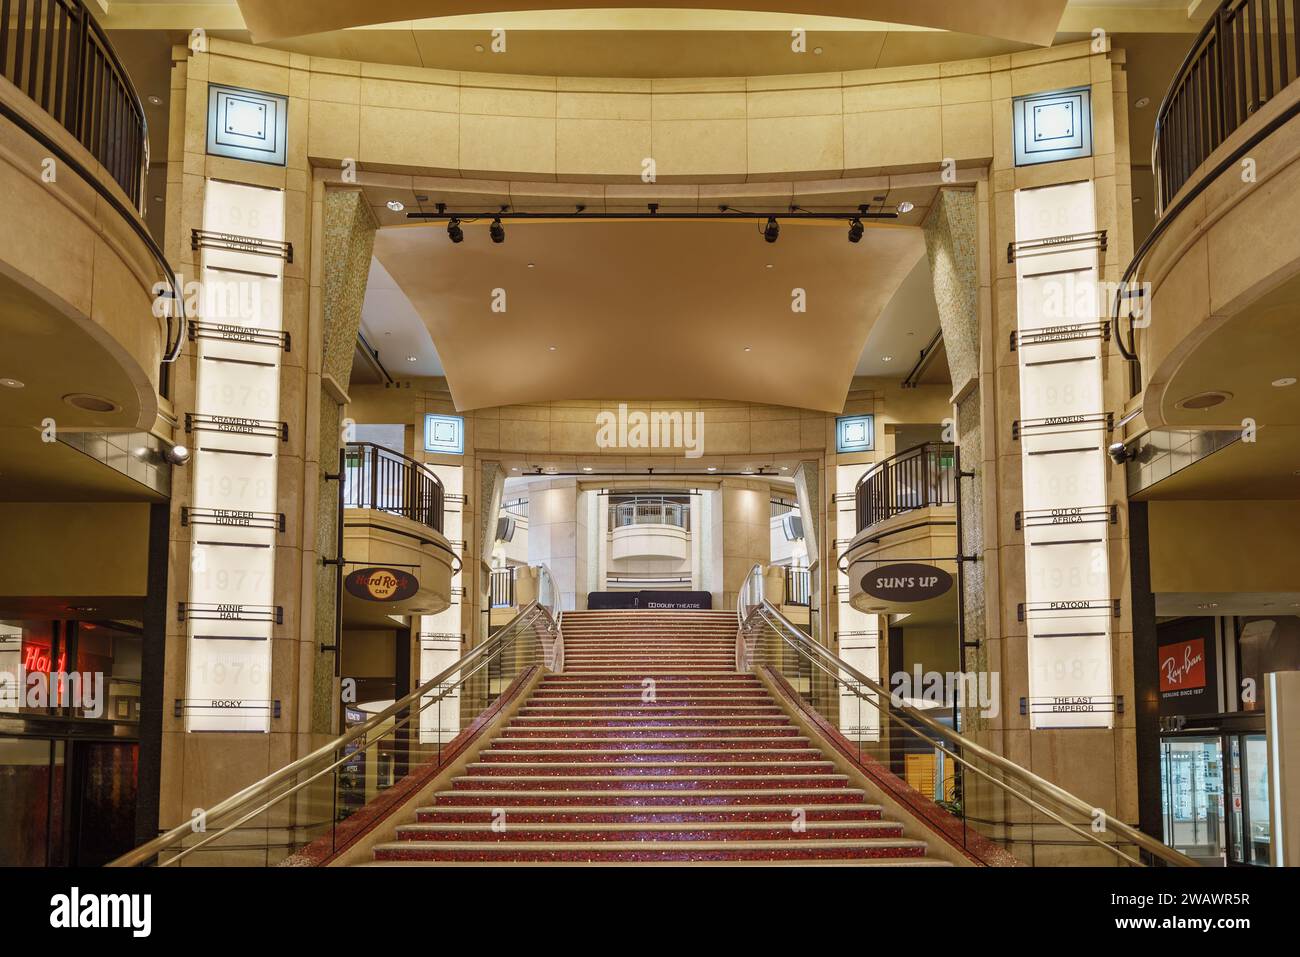 The Grand Staircase inside the Dolby Theatre on Hollywood Boulevard in Los Angeles, California, USA. Venue of the annual Academy Awards ceremony. Stock Photo